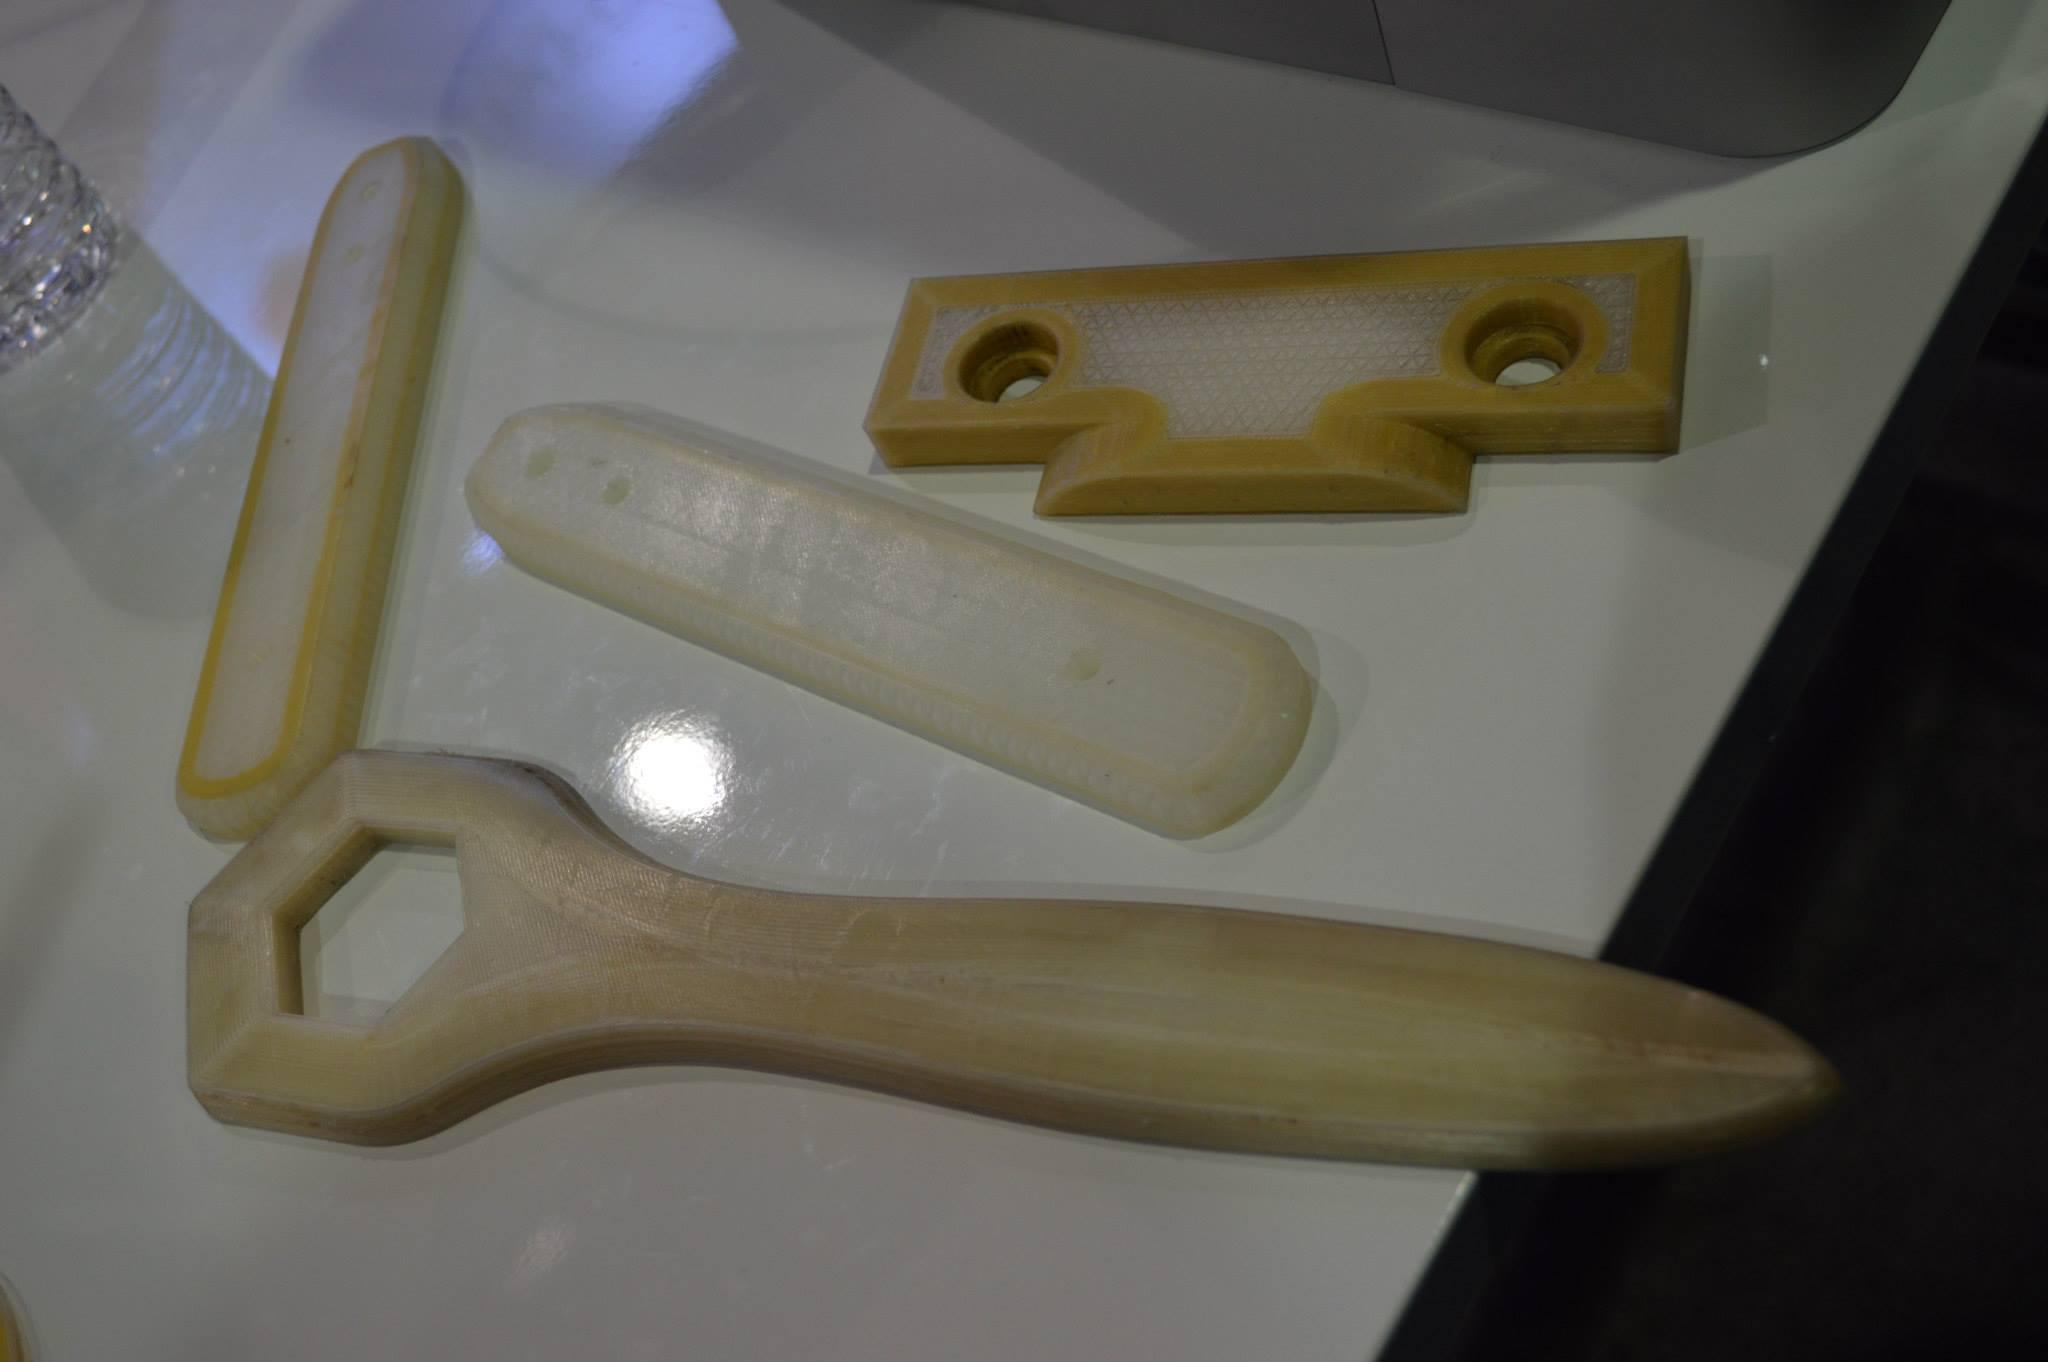 Parts 3D printed with fiberglass and Kevlar in them.